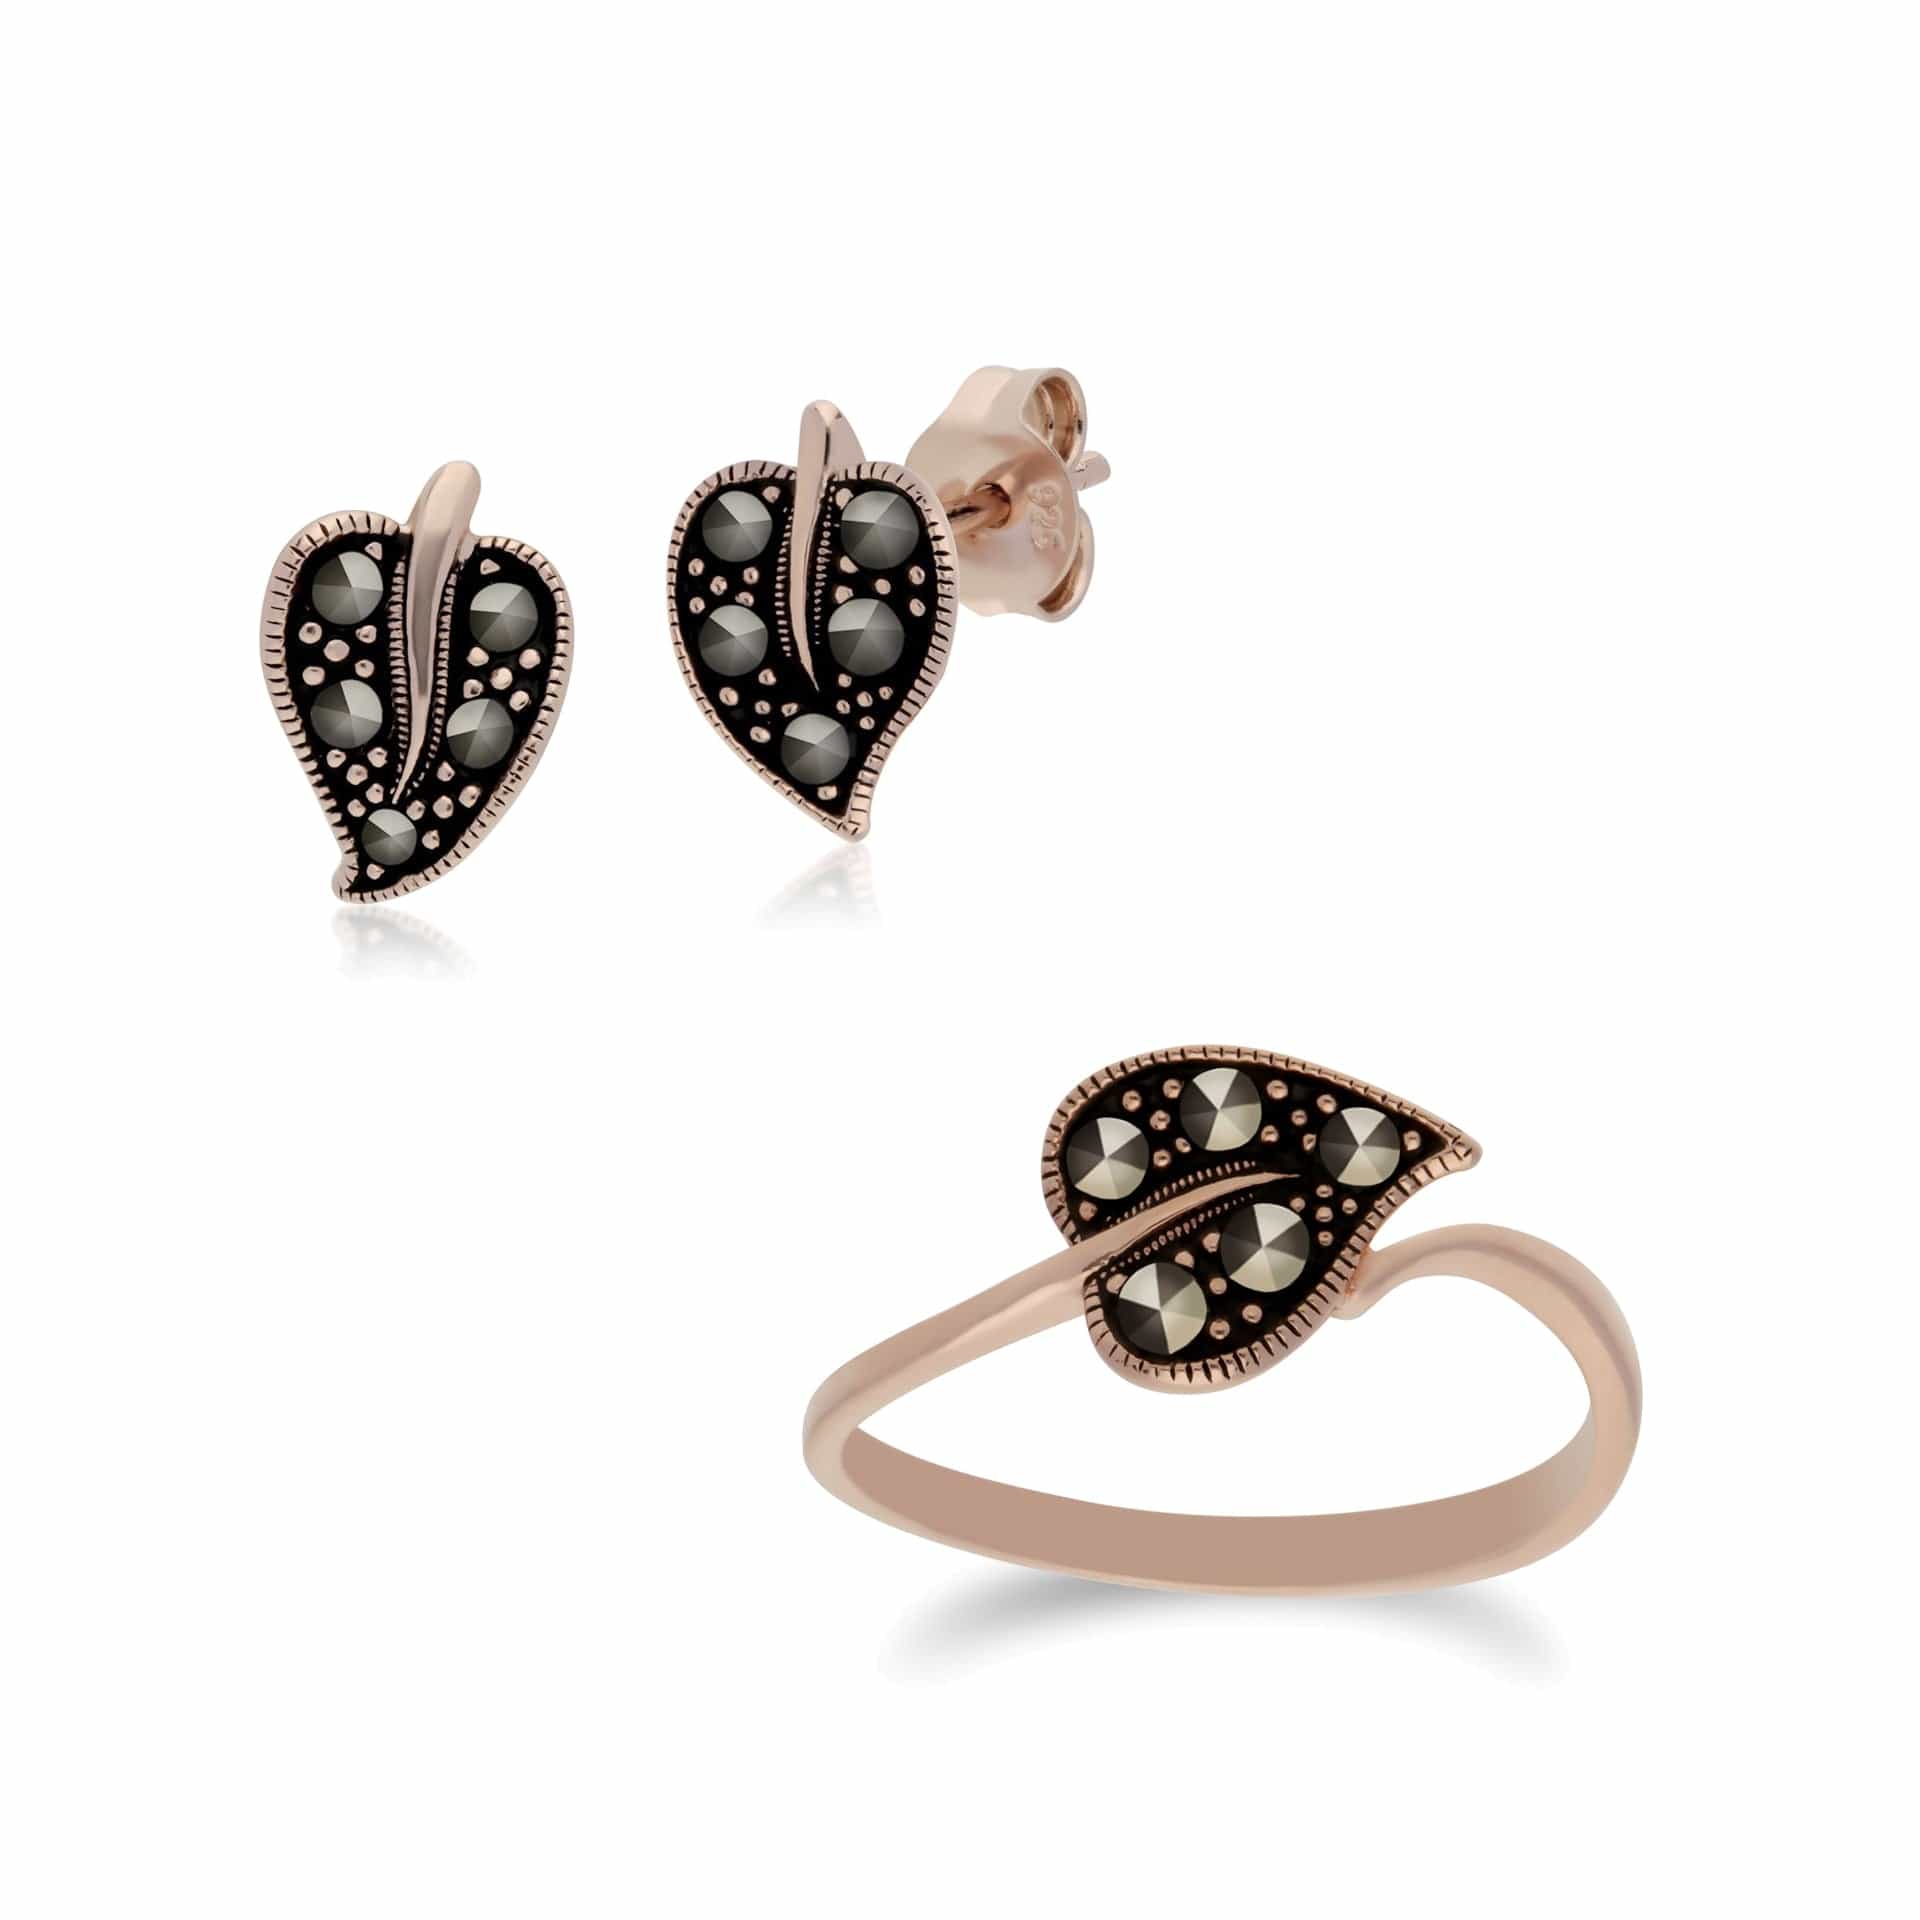 224E023401925-224R030501925 Rose Gold Plated Silver Marcasite Leaf Stud Earrings & Ring Set 1